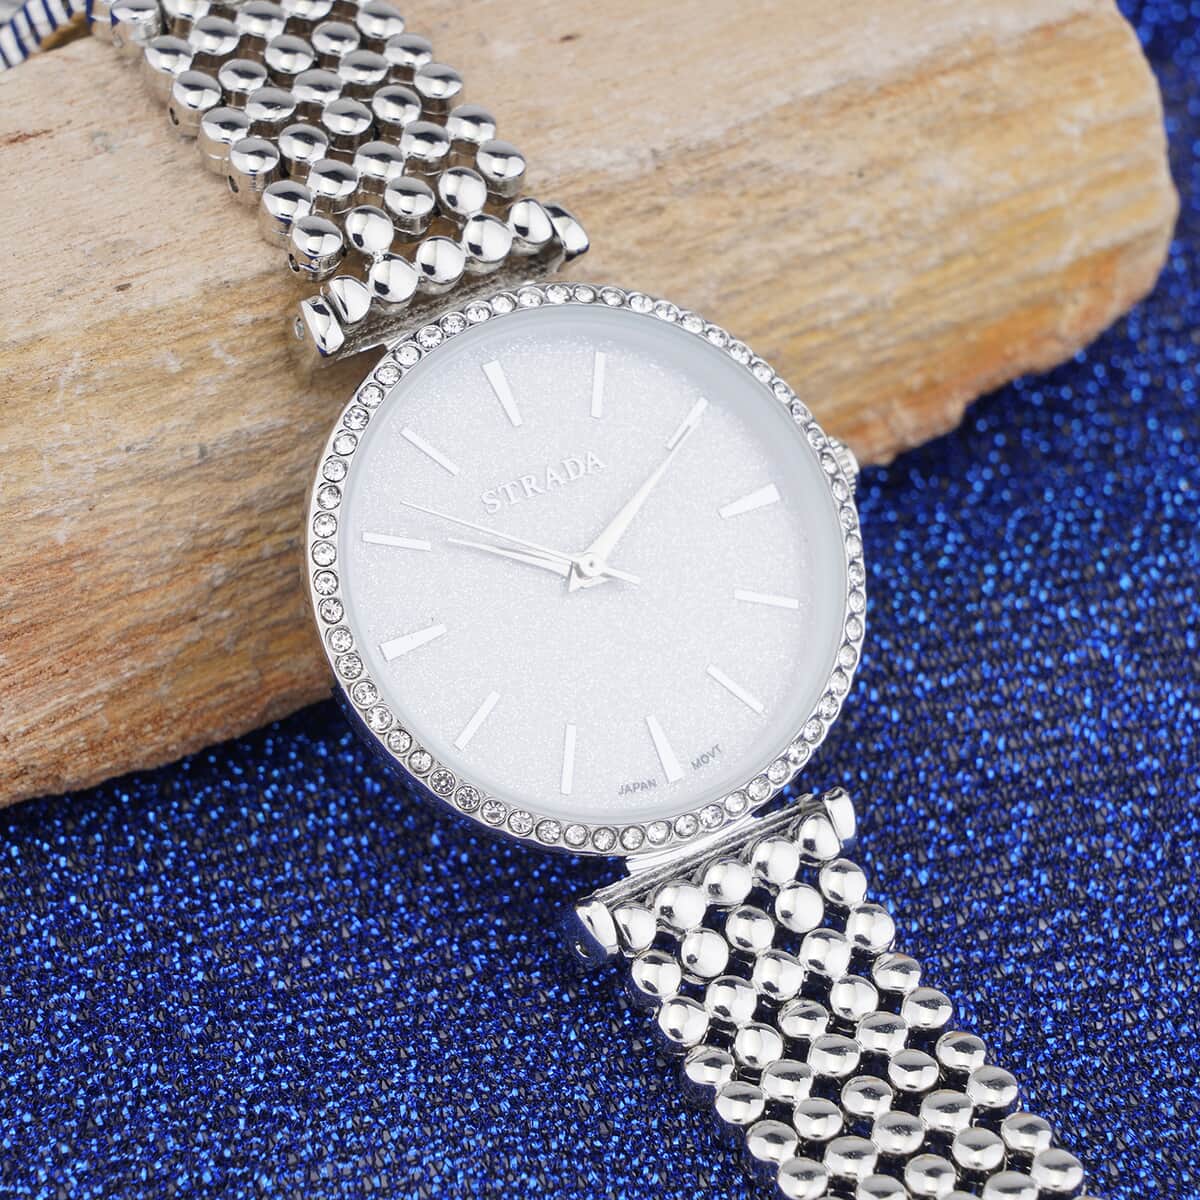 STRADA 10th ANNIVERSARY SPECIAL White Austrian Crystal Japanese Movement Watch in Silvertone with Beaded Textured Strap image number 1